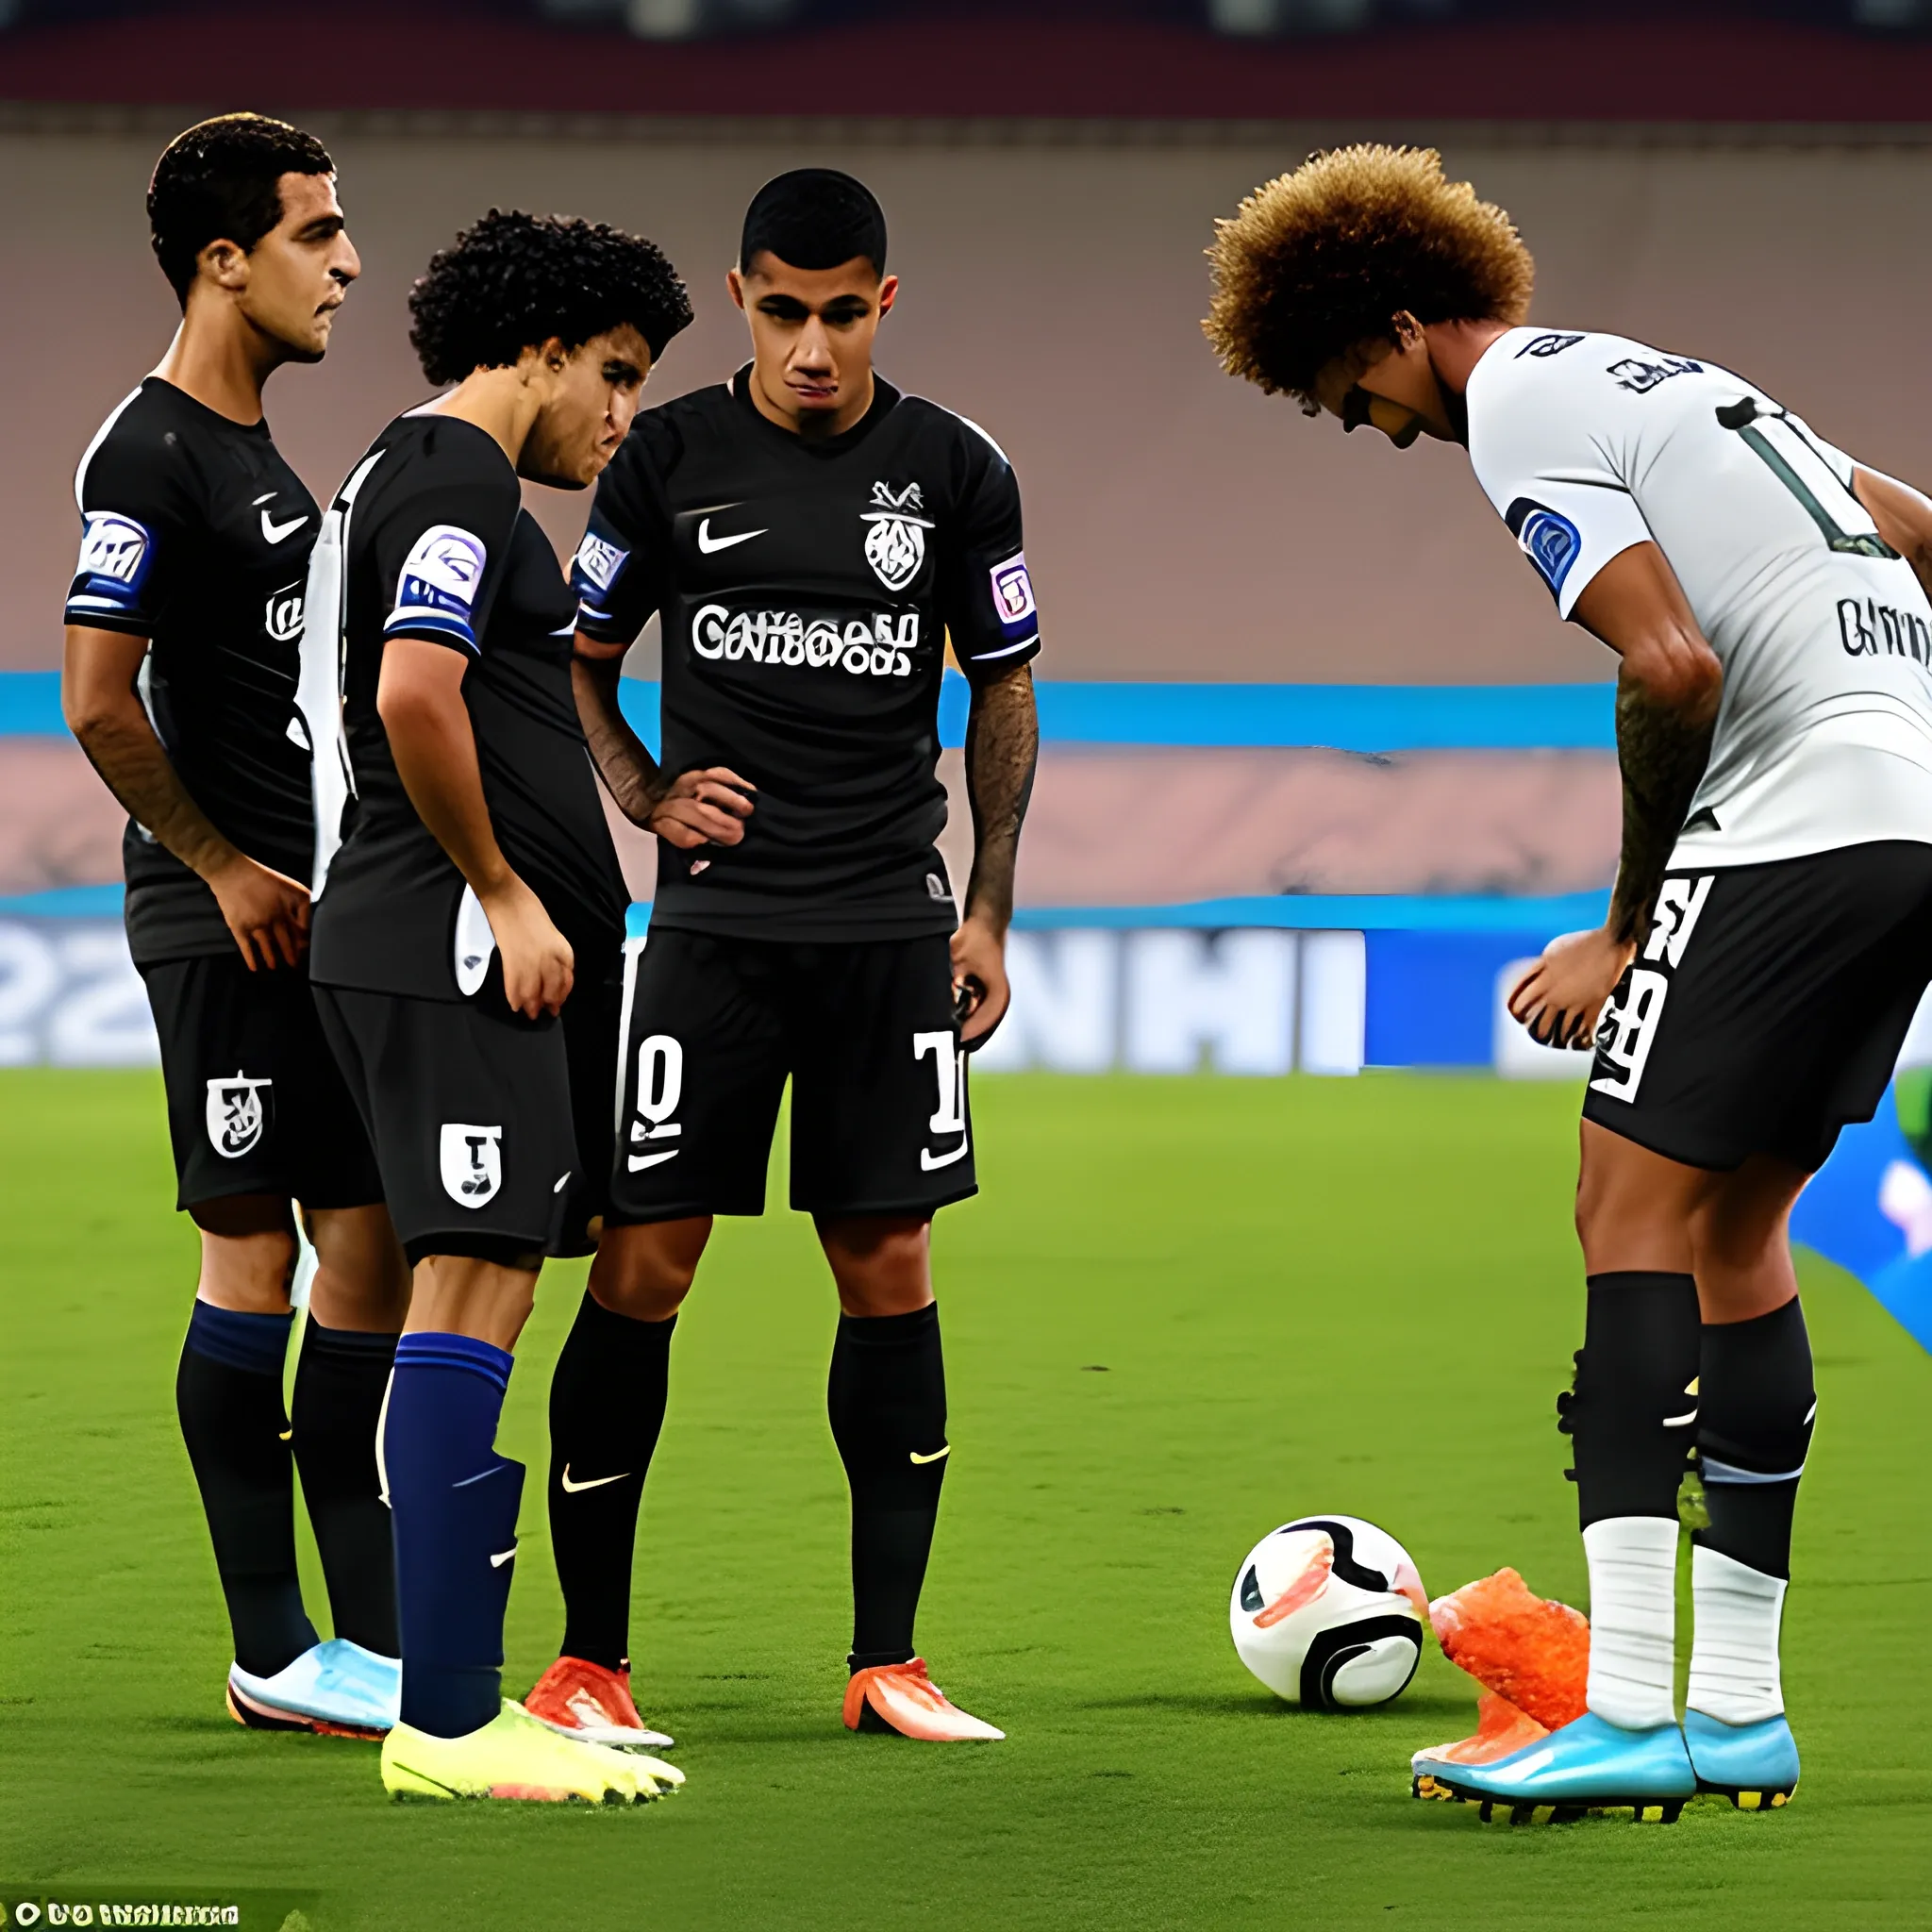 left back of Corinthians Futebol Clube, polishing Fabio Santos' boots at the entrance to the field, with the other players ready to start the match